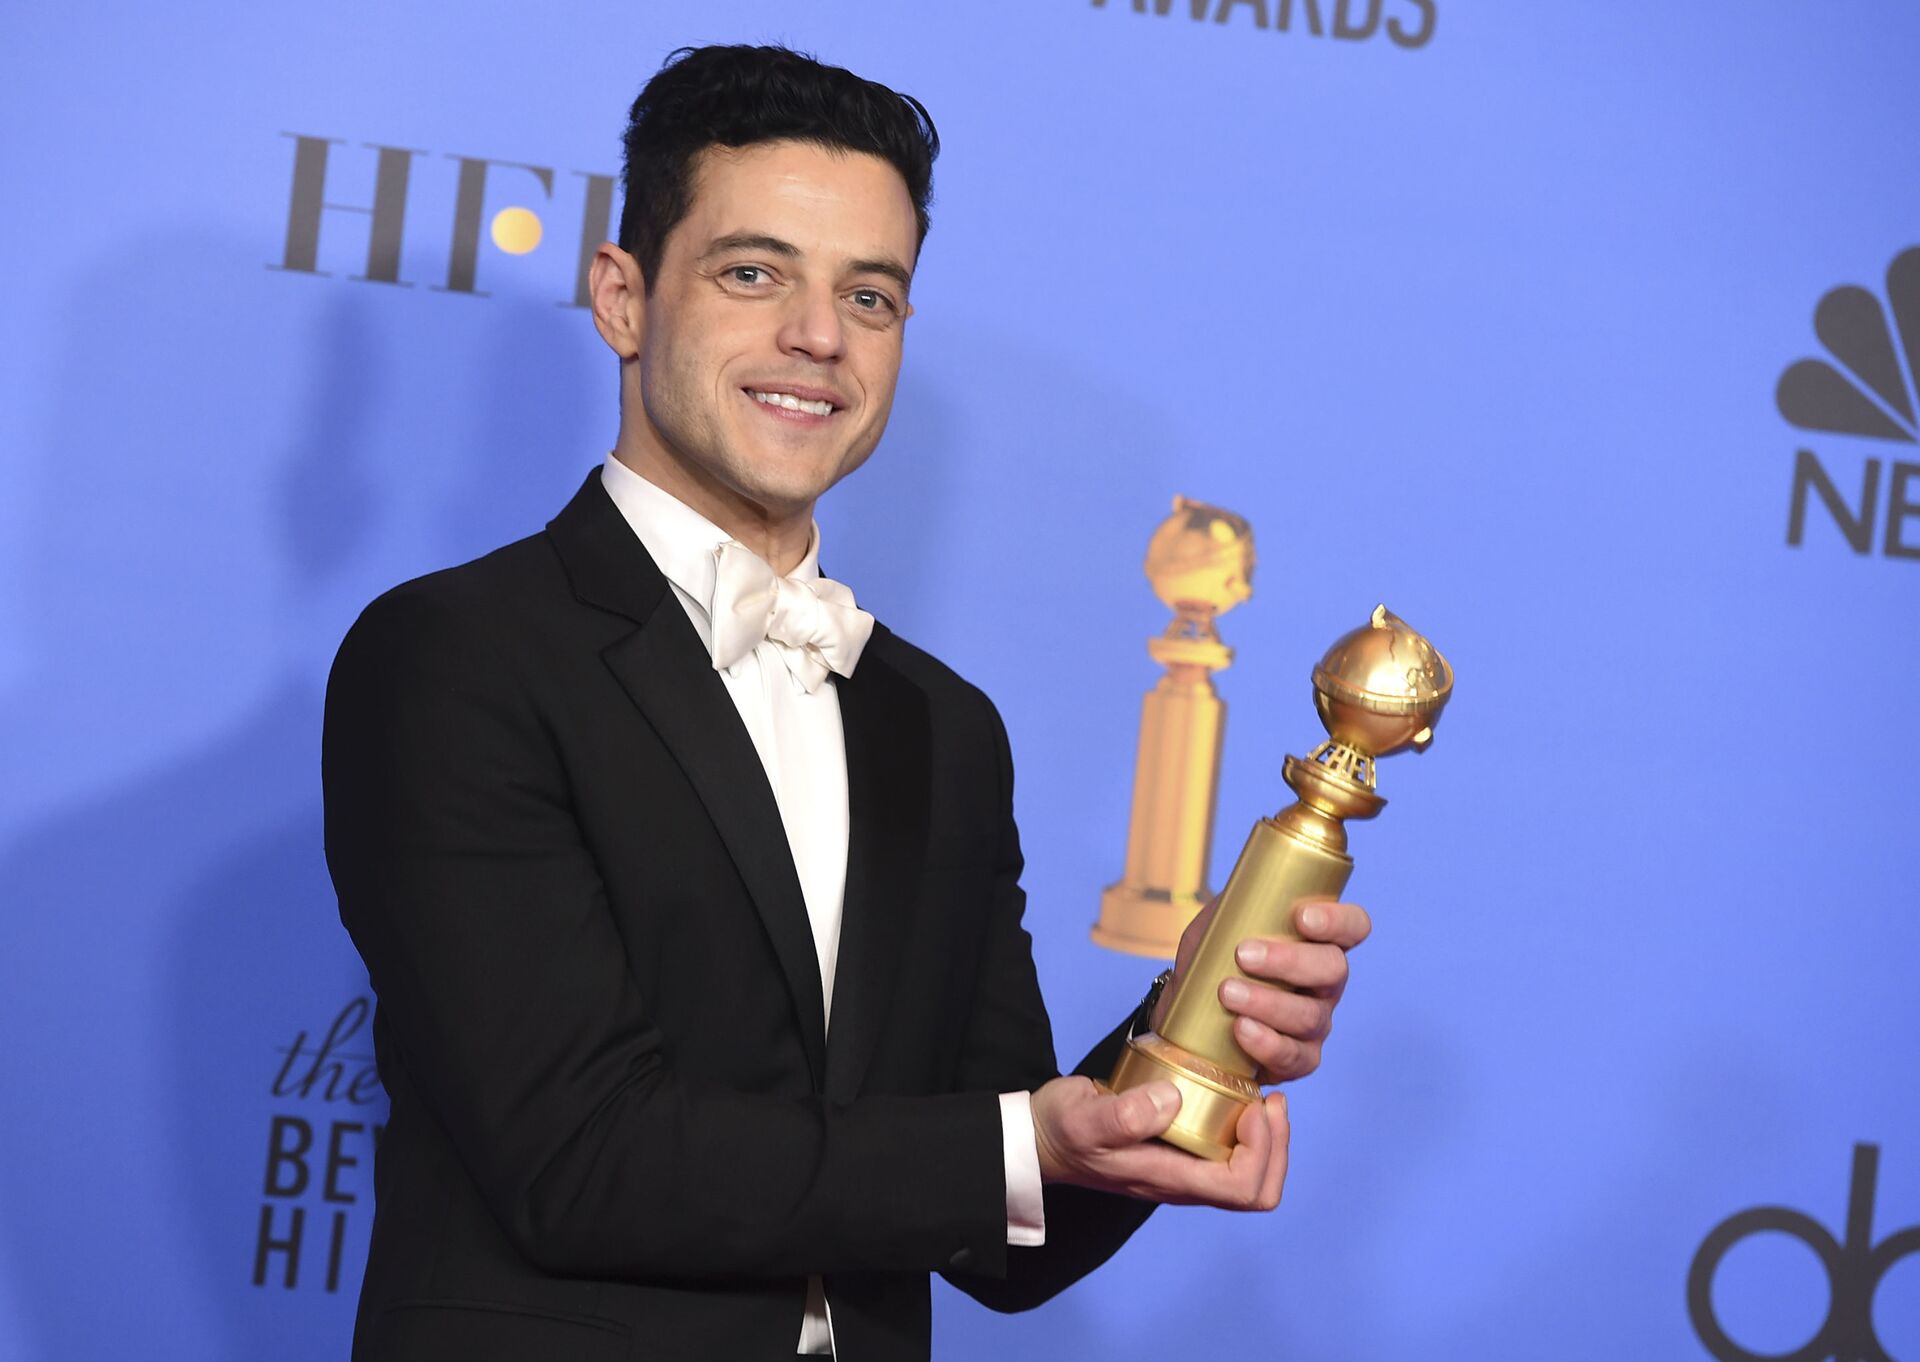 Rami Malek poses in the press room with the award for best performance by an actor in a motion picture, drama for Bohemian Rhapsody at the 76th annual Golden Globe Awards at the Beverly Hilton Hotel on Sunday, Jan. 6, 2019, in Beverly Hills, Calif. - Sputnik International, 1920, 14.10.2021